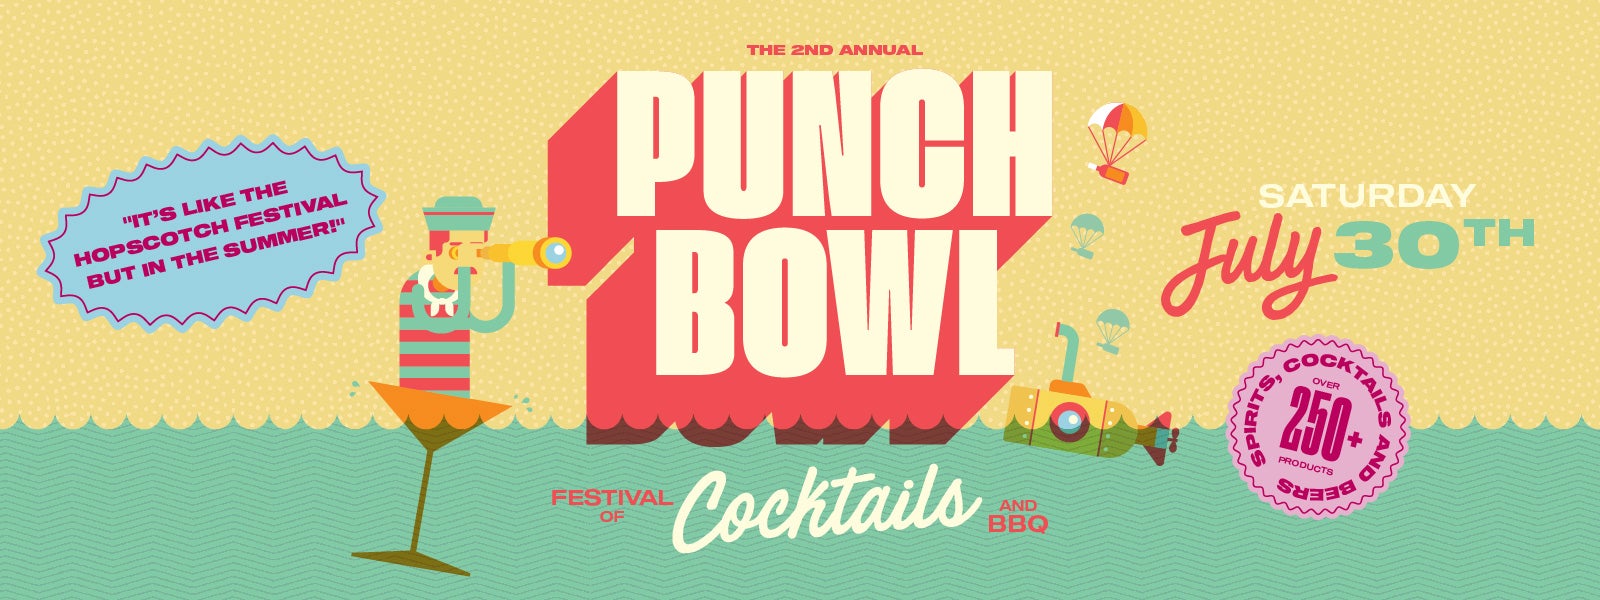 PUNCHBOWL, THE FESTIVAL OF COCKTAILS & BBQ  SATURDAY JULY 30TH